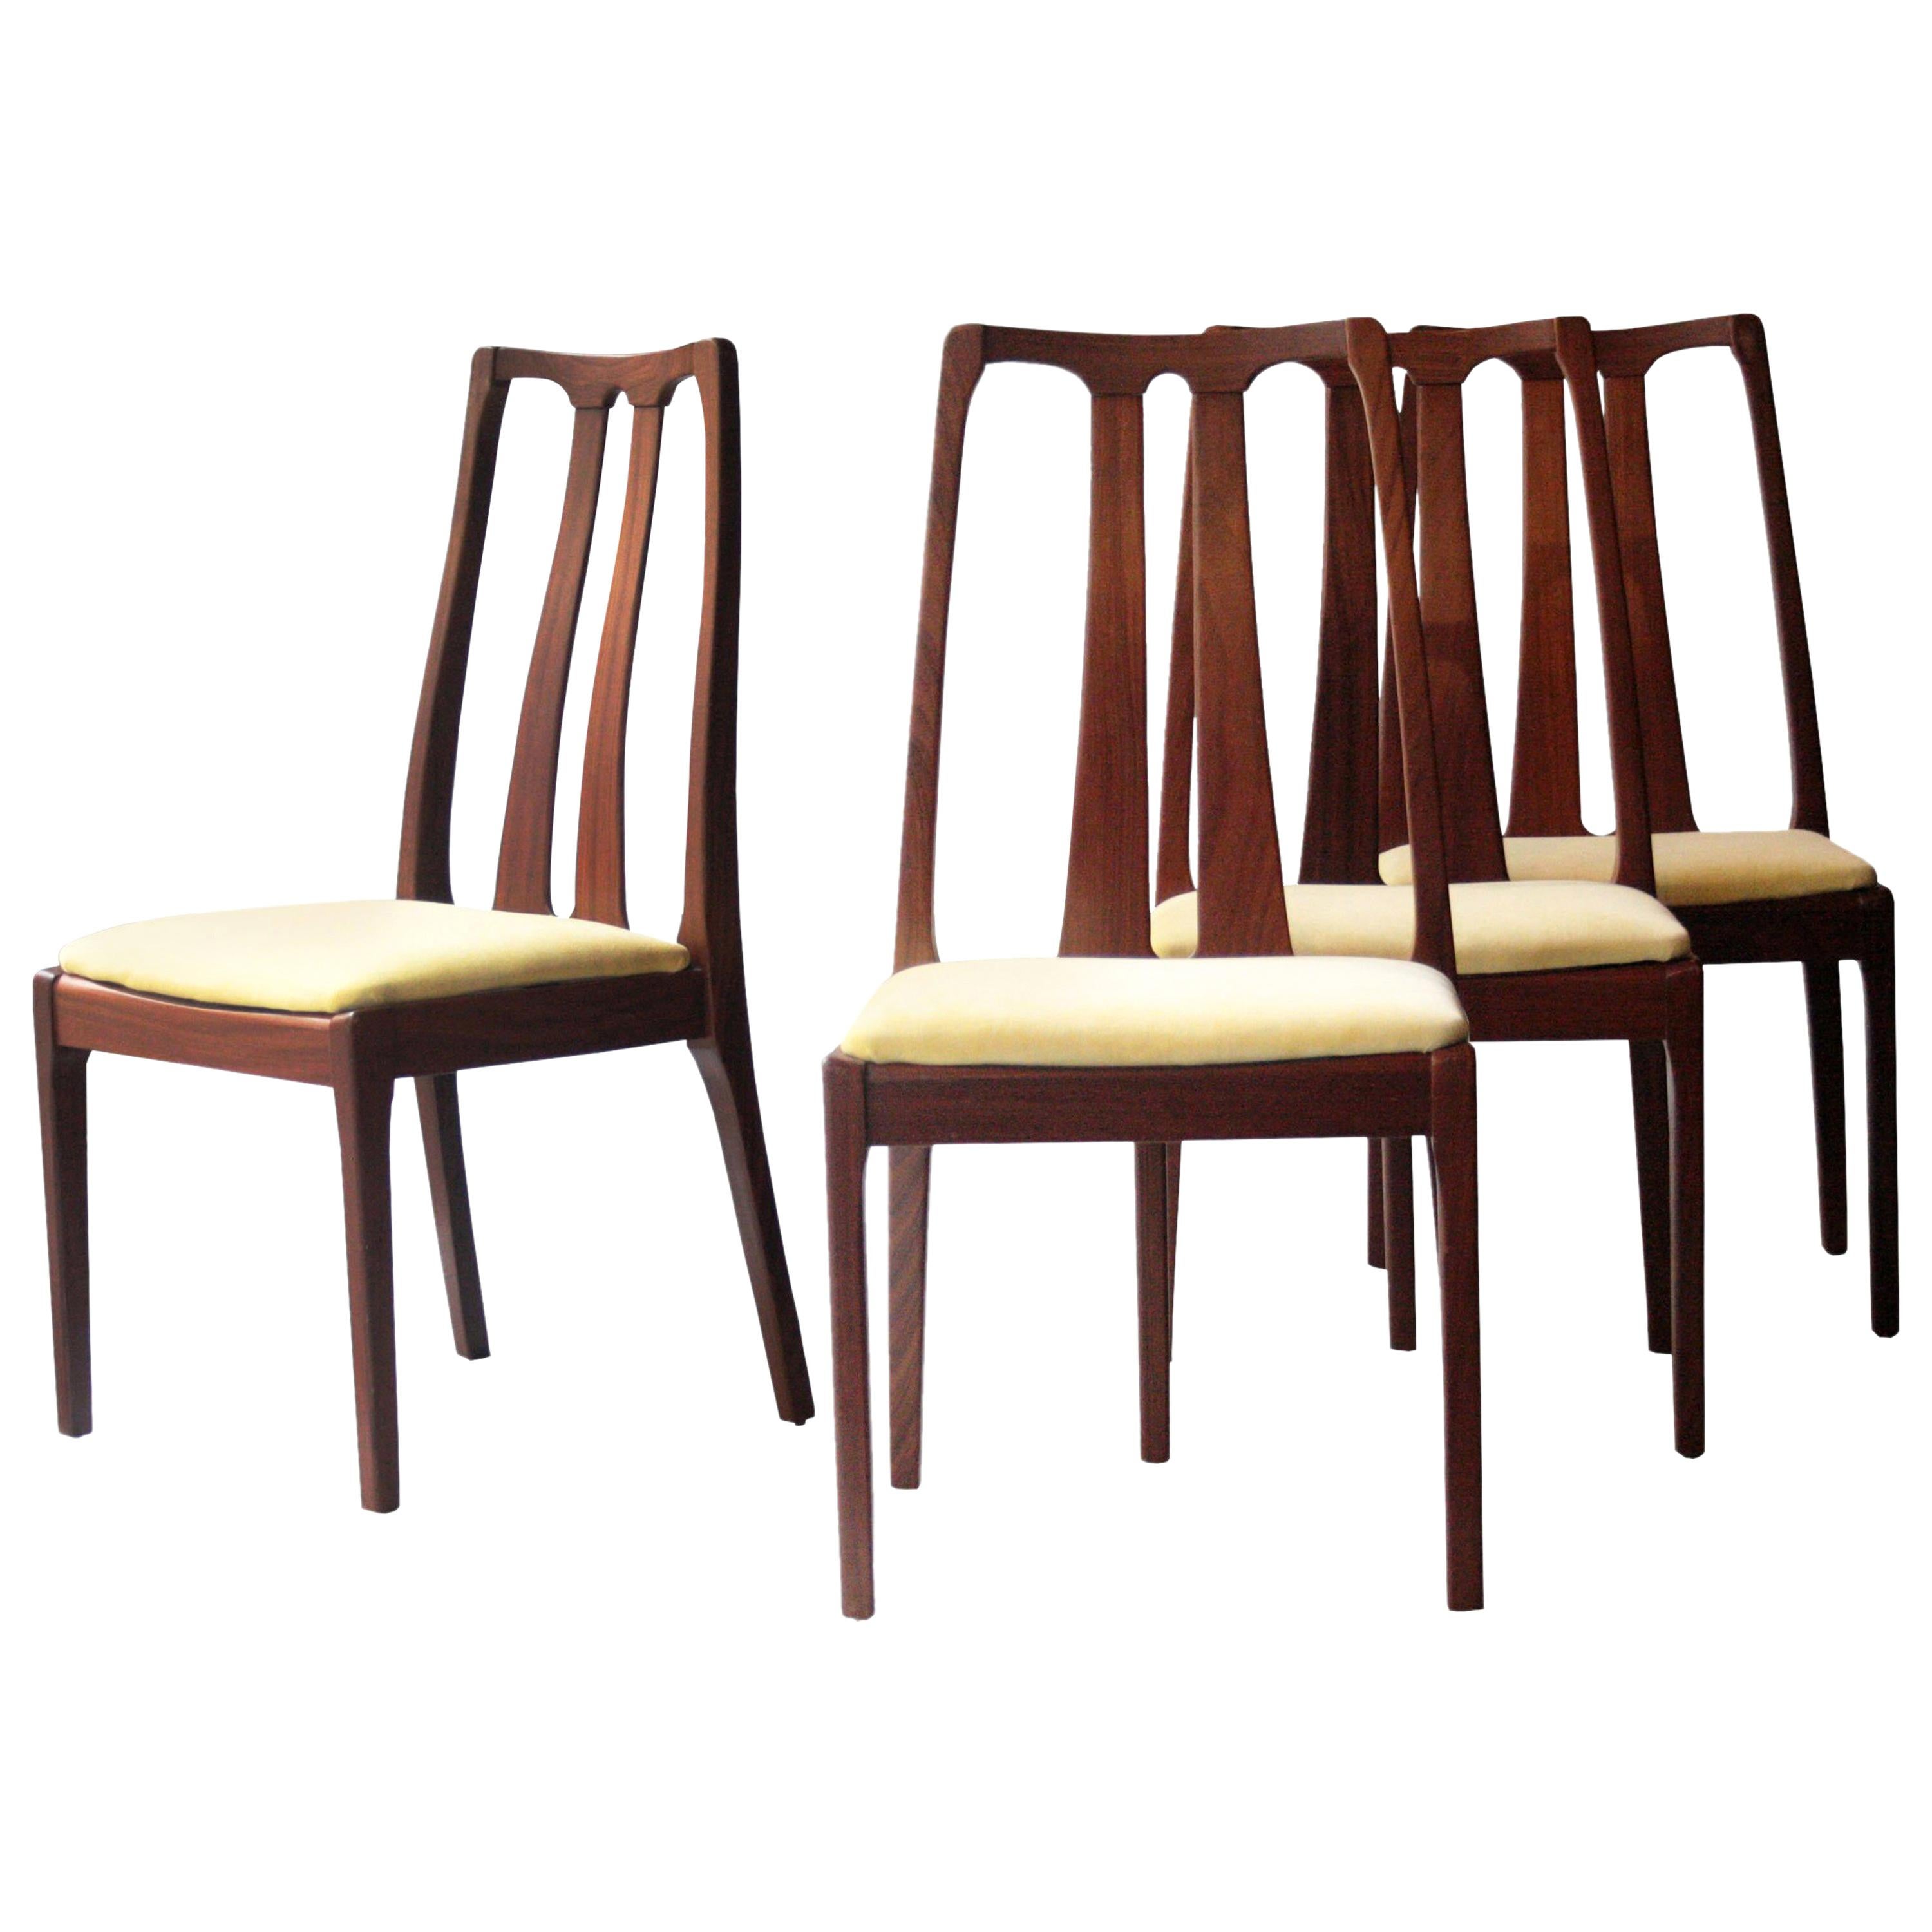 Midcentury Modern Yellow Brown Teak Set Four English Chairs, United Kingdom 1970 For Sale